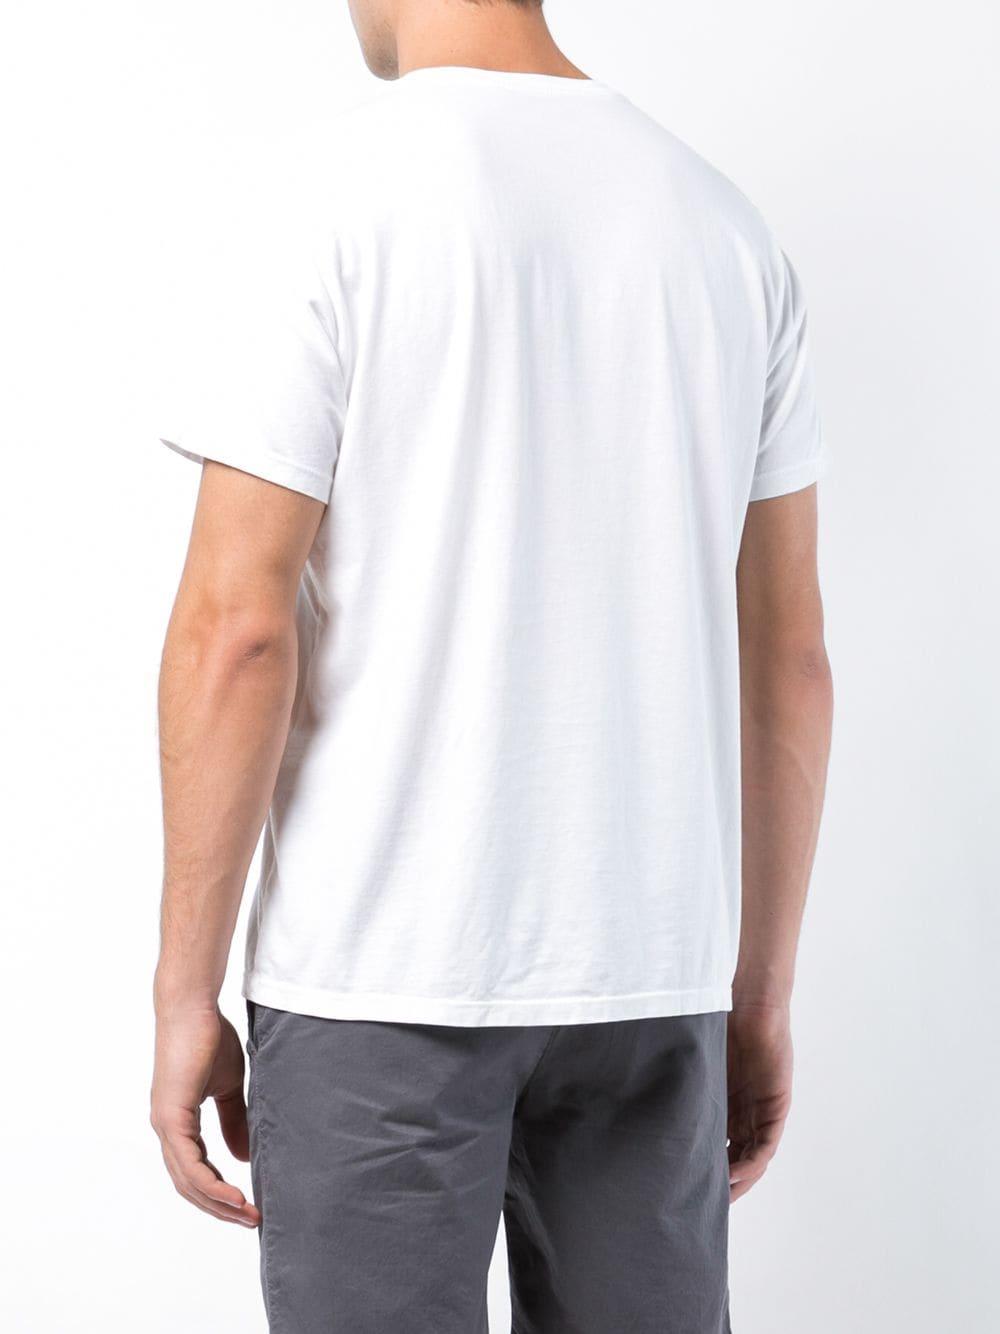 Save Khaki Cotton Classic Short-sleeve T-shirt in White for Men - Lyst